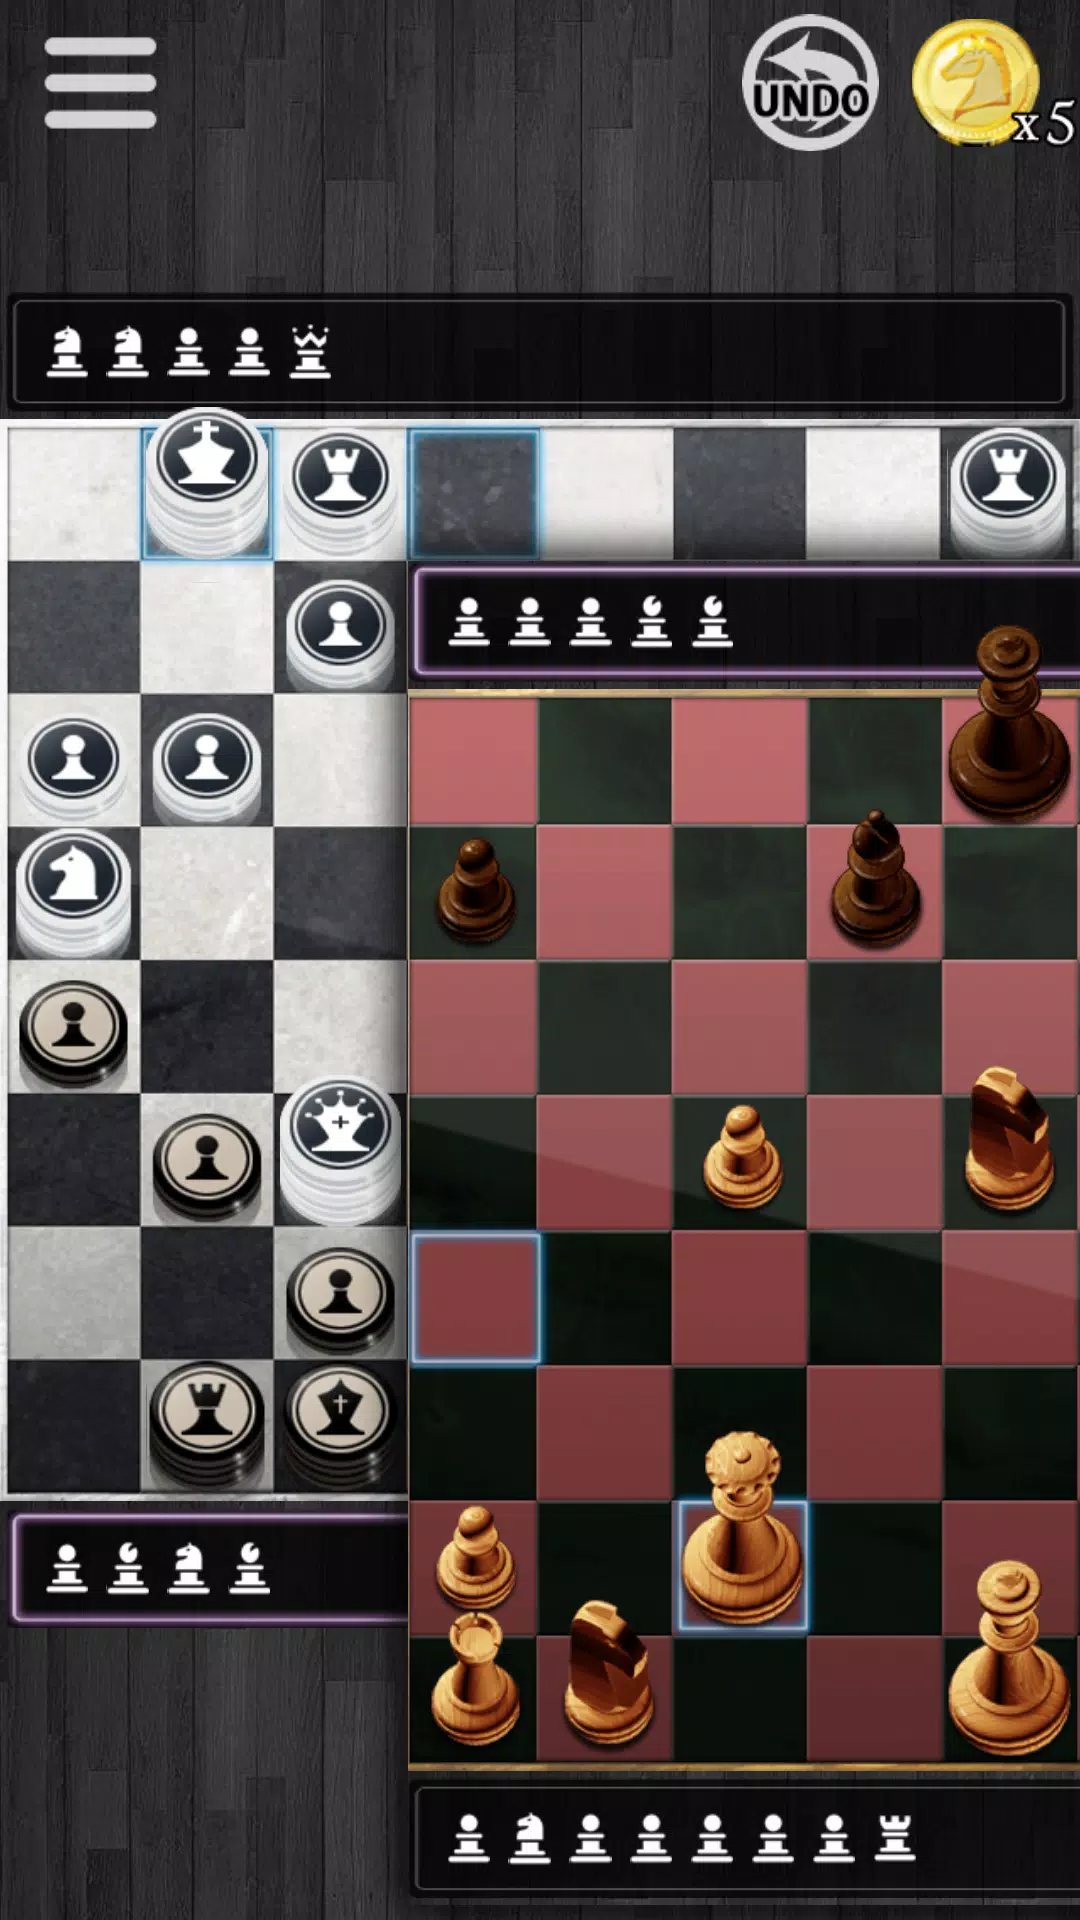 Where can I download AlphaZero Chess Engine for Android or Windows? - Quora